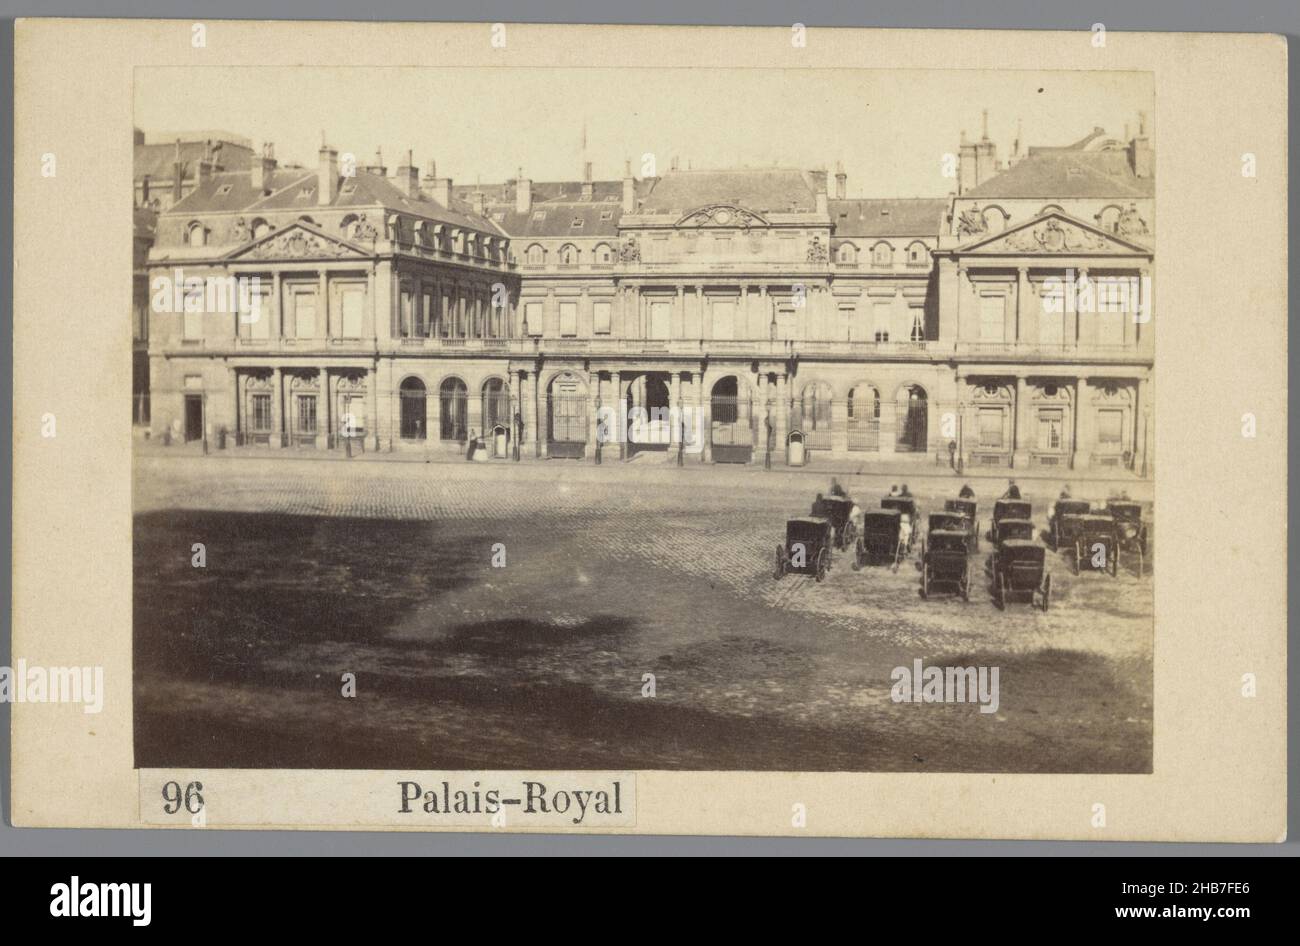 Palais-Royal, Paris, Palais Royal (title on object), Carte-de-visite, so-called instantanée, showing early street view of the Palais-Royal in Paris, with moving carriages and people walking., Martinet (fotograaf) (mentioned on object), Paris, c. 1865, cardboard, paper, albumen print, height 101 mm × width 64 mm Stock Photo